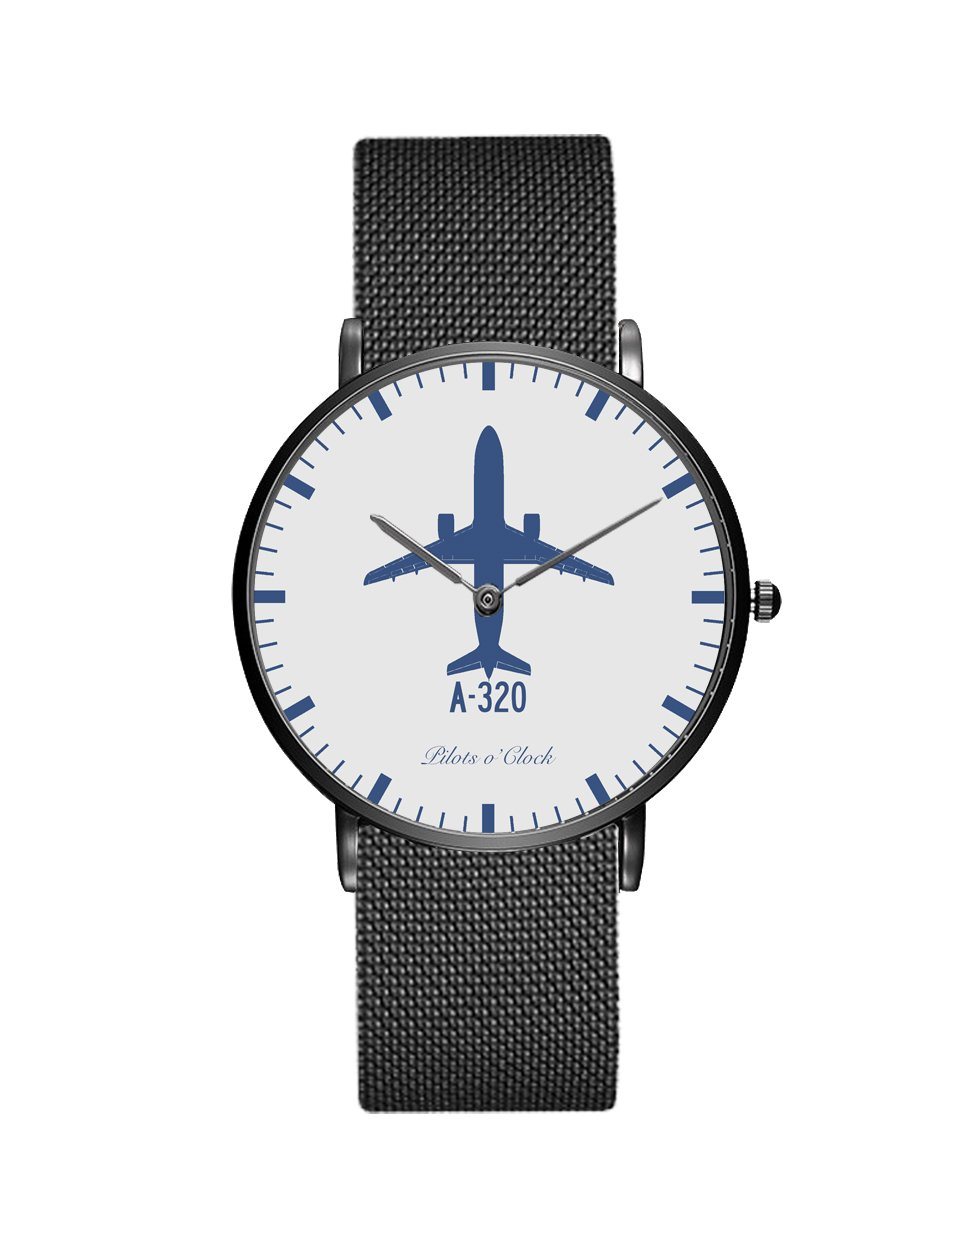 Airbus A320 Stainless Steel Strap Watches Pilot Eyes Store Black & Stainless Steel Strap 